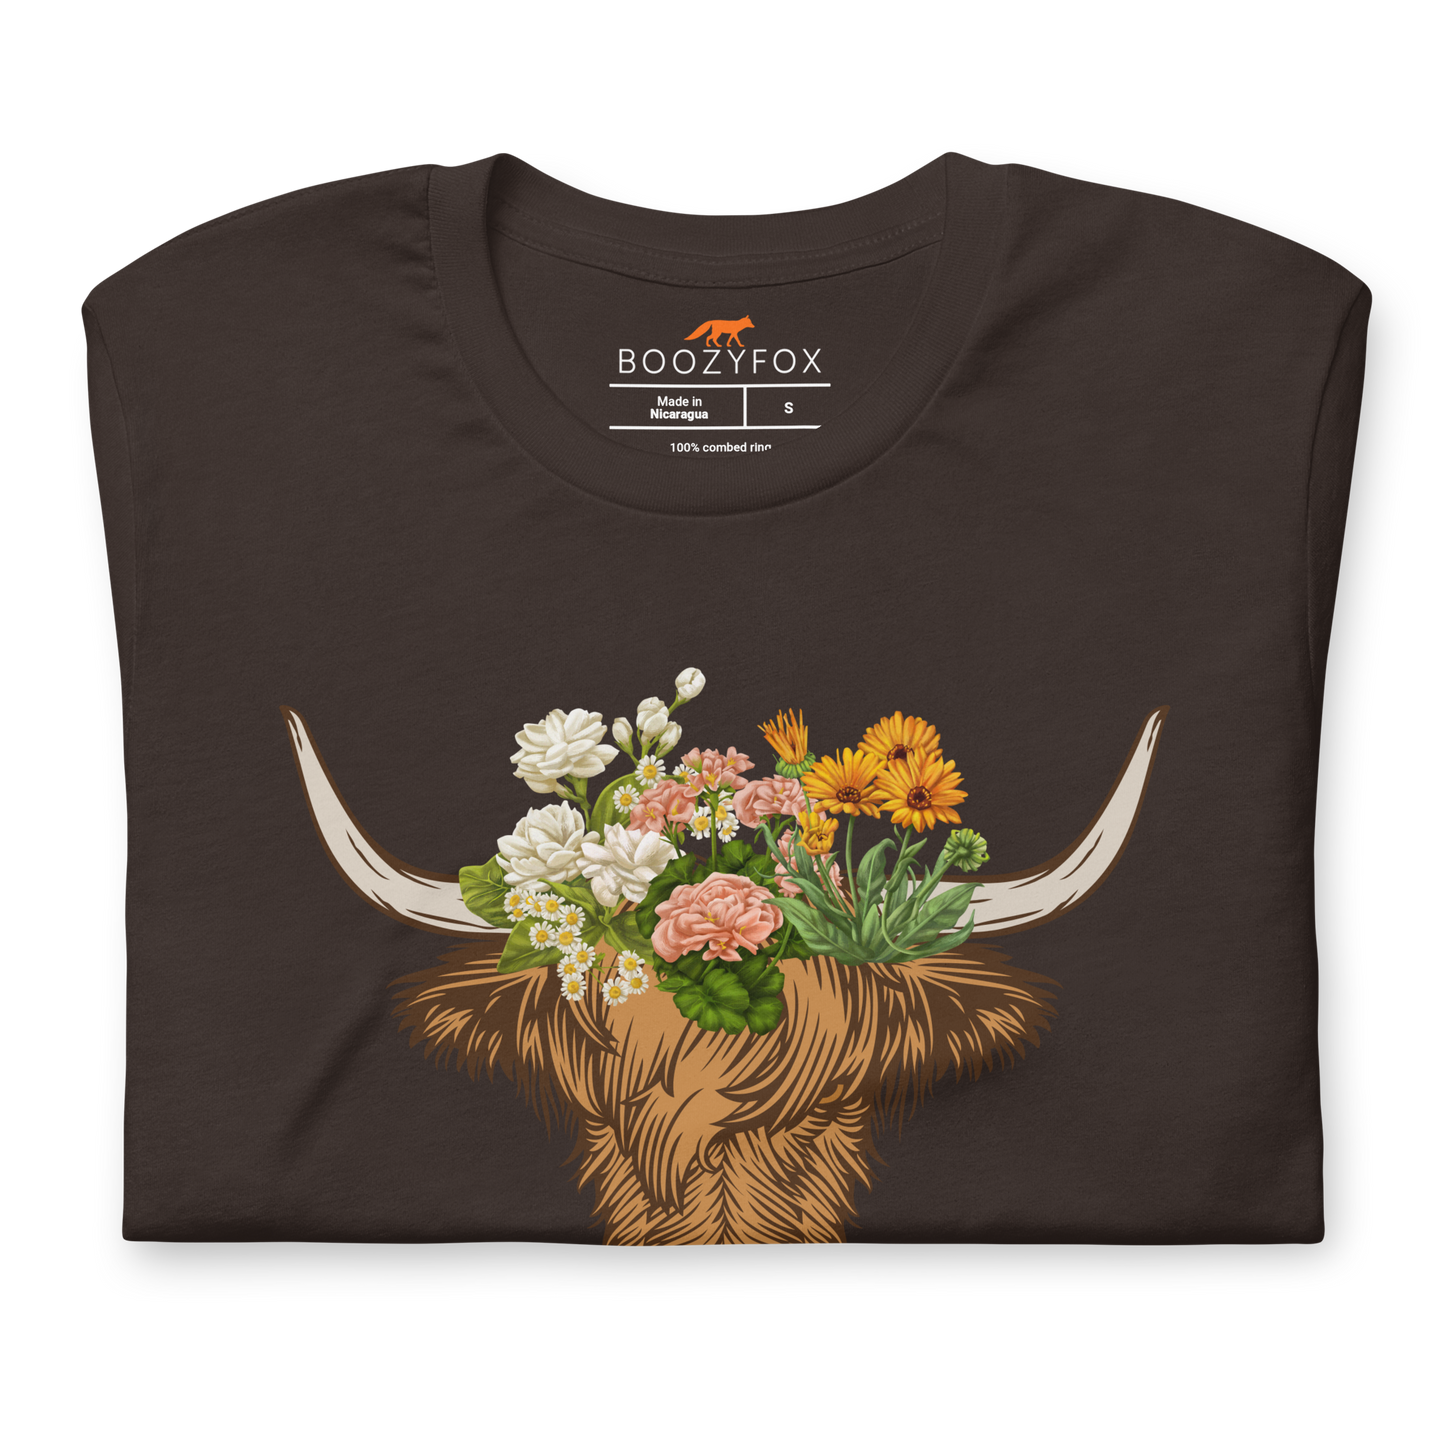 Front details of a Brown Premium Highland Cow Tee featuring an adorable I Love Fluffy Cows graphic on the chest - Cute Graphic Highland Cow Tees - Boozy Fox